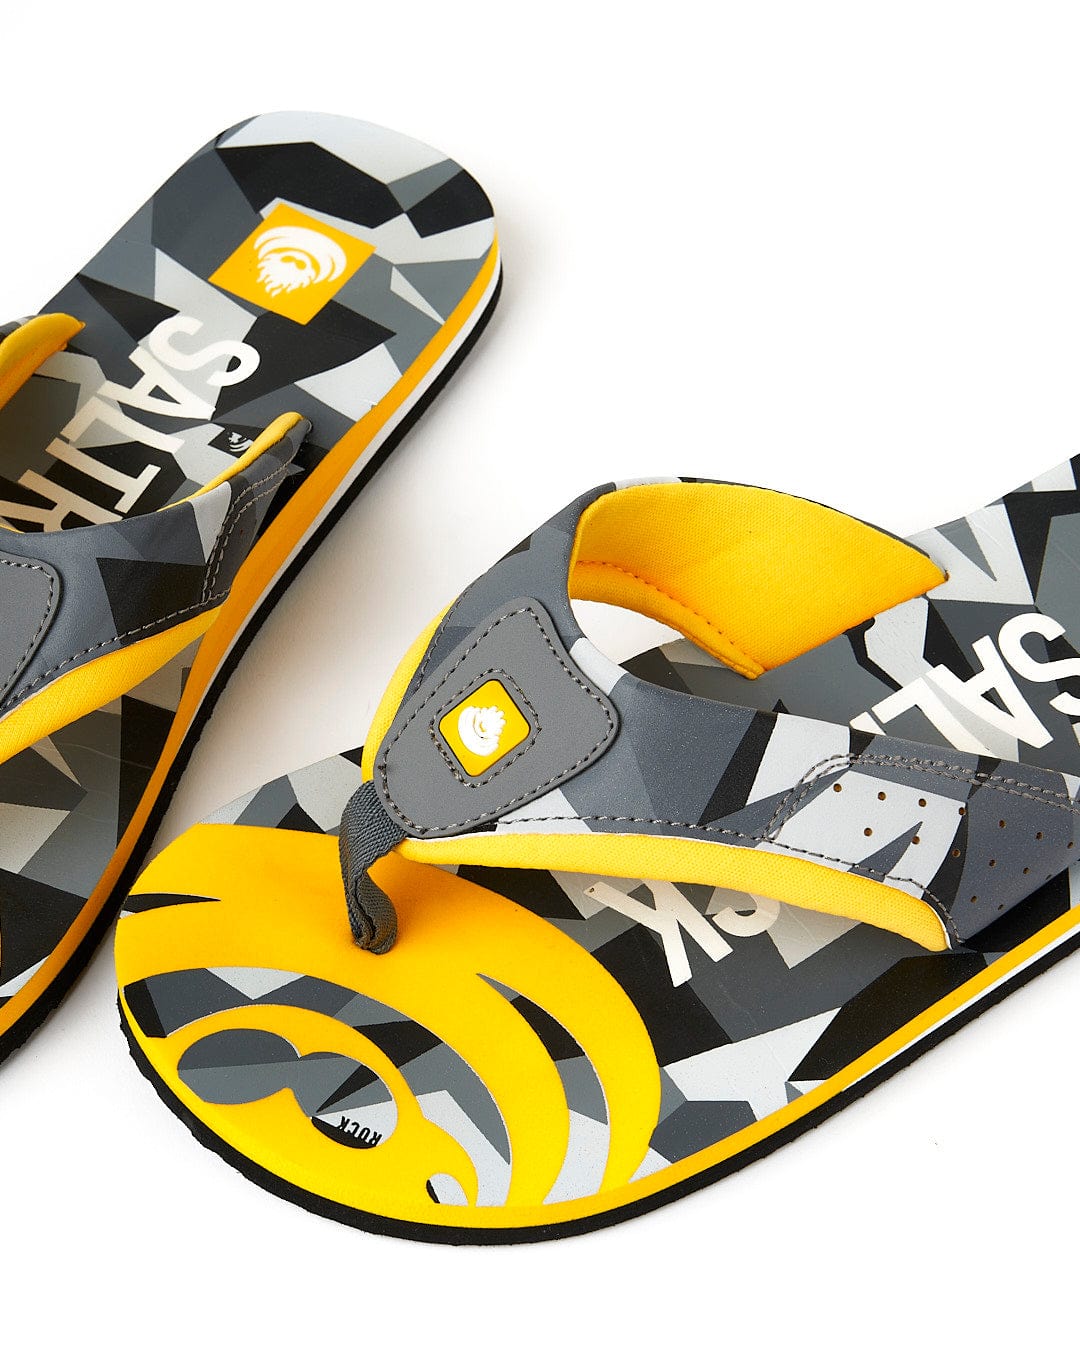 Saltrock presents the Camo Corp - Flip Flops - Dark Grey, a stylish footwear choice featuring a camouflage pattern.